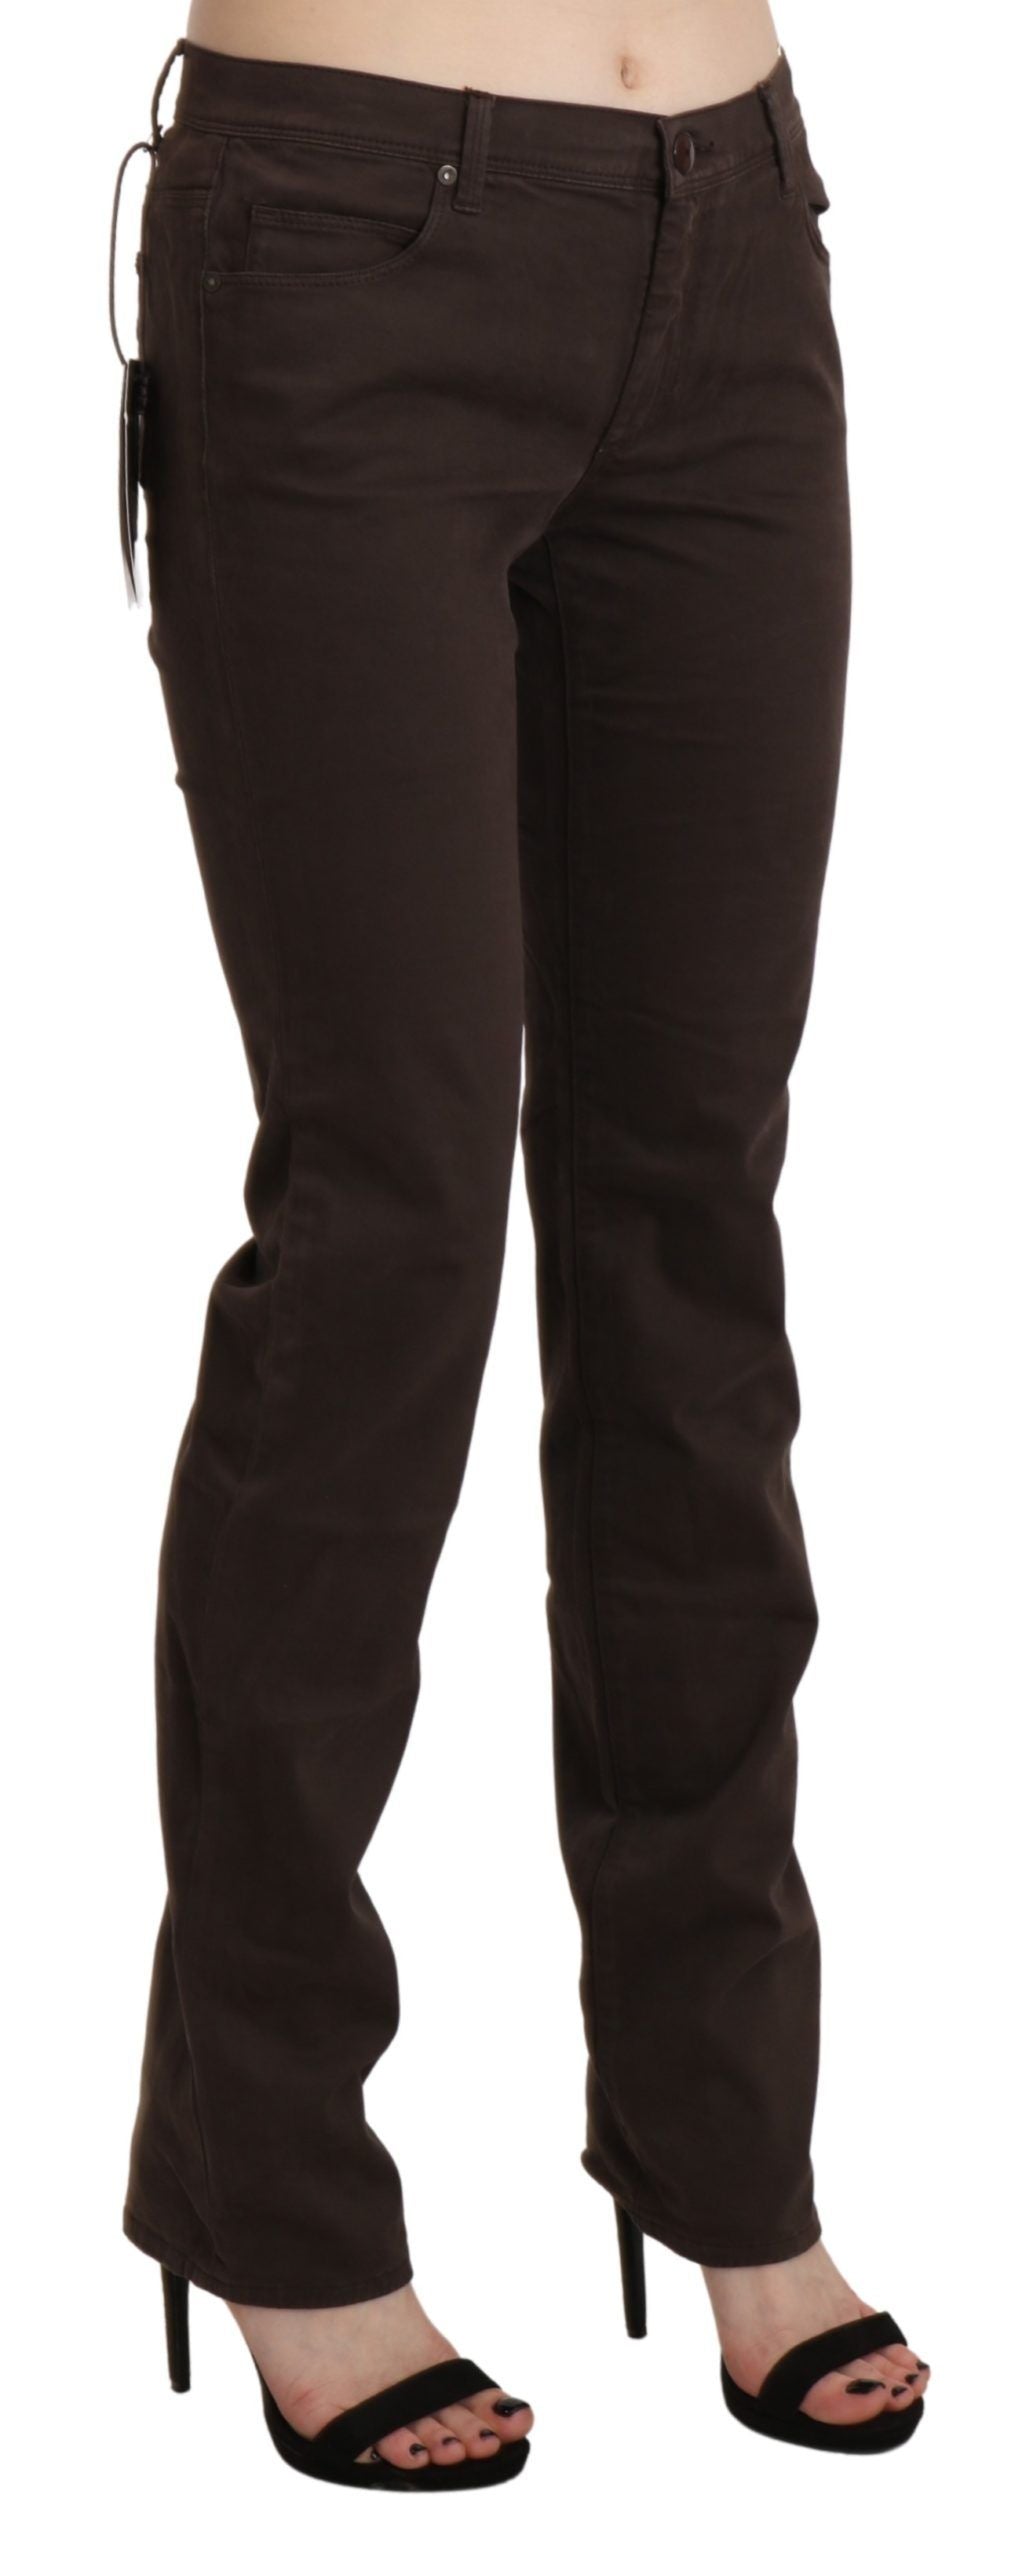 Ermanno Scervino Chic Brown Mid Waist Skinny Trousers